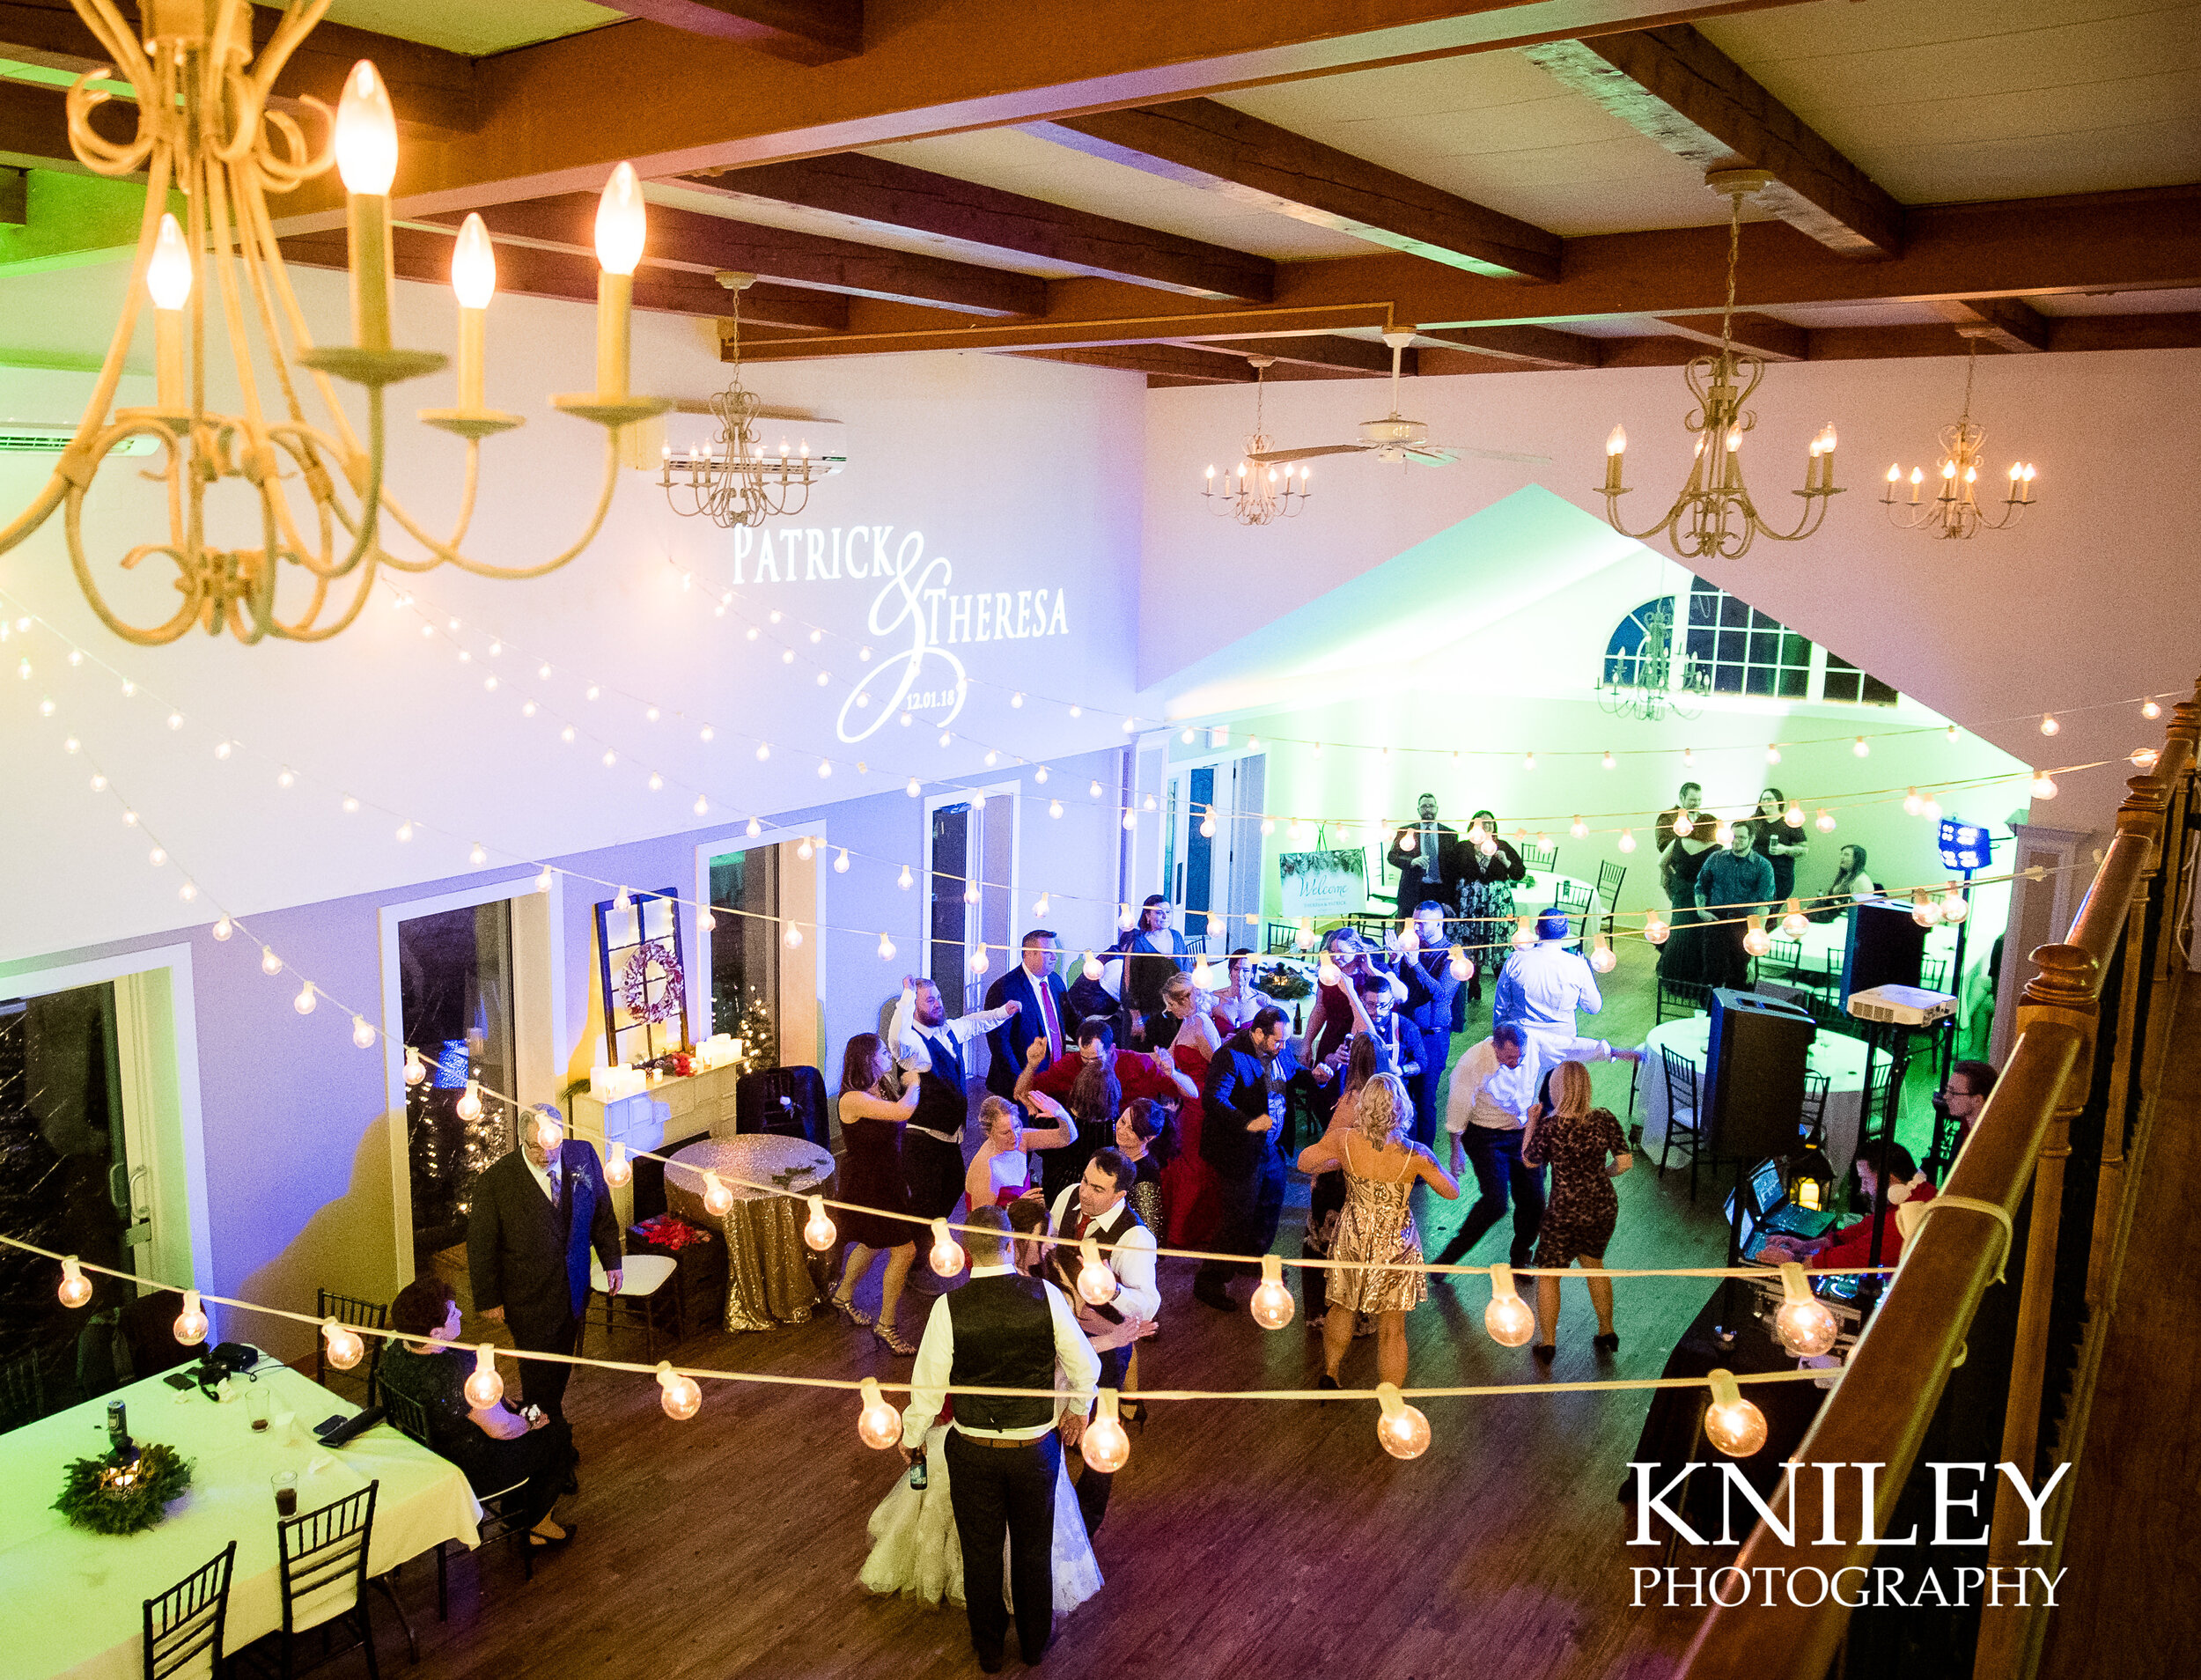 026-Kniley-Photography-Westminster-Chapel-Wedding-Venue-Picture-0298.jpg